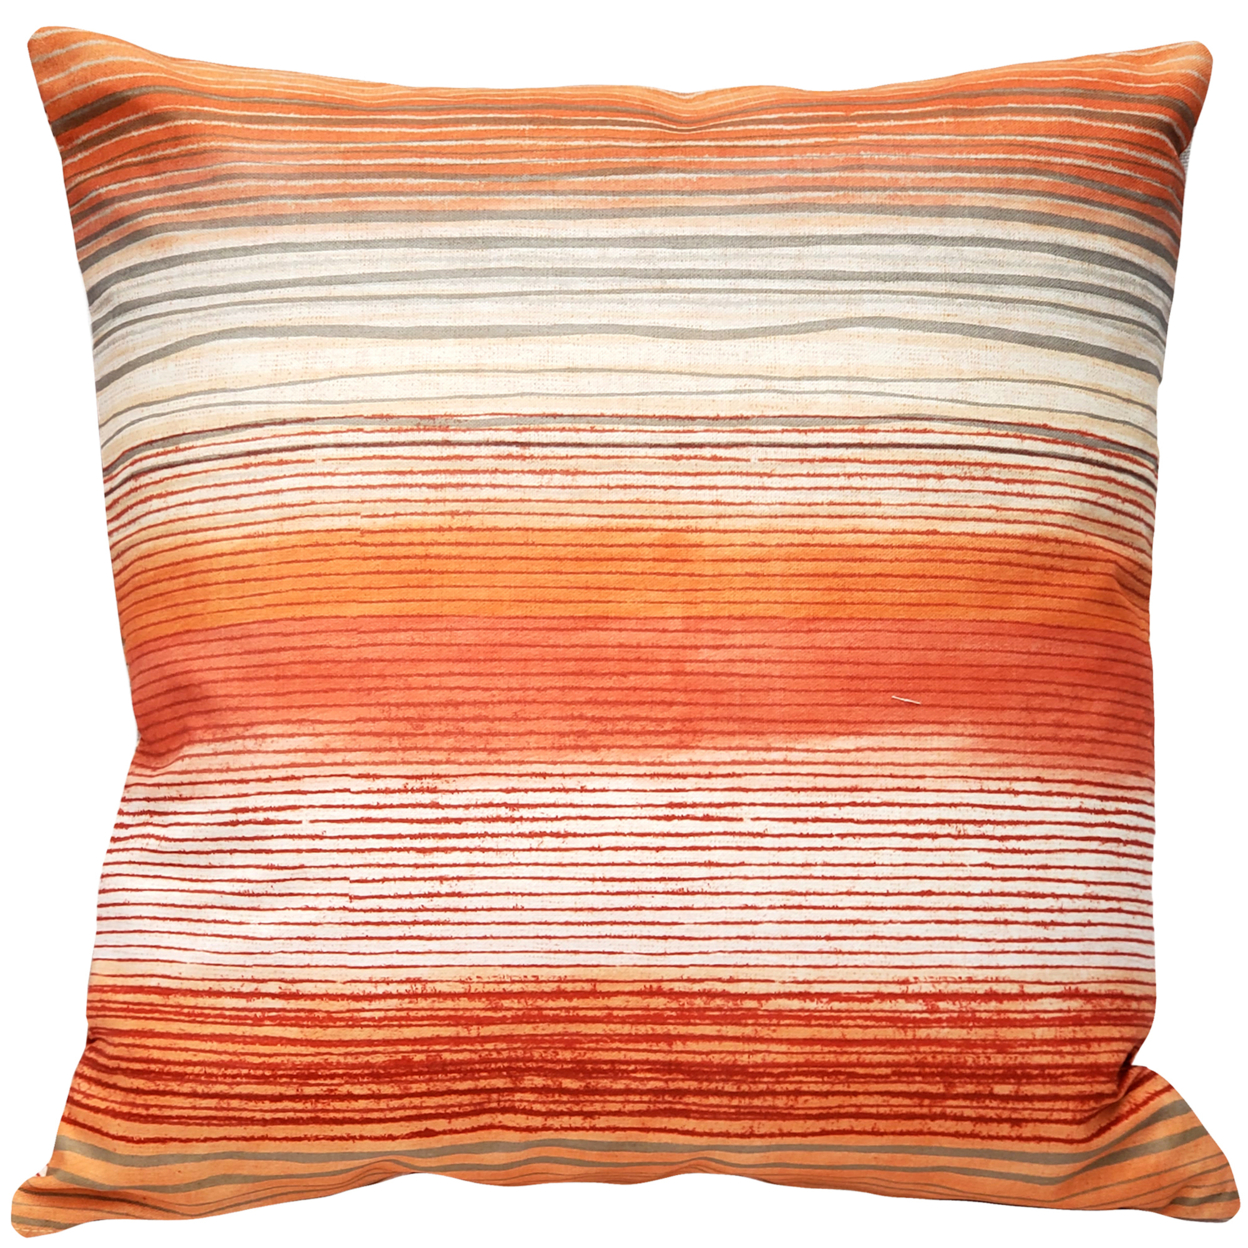 Sedona Stripes Orange Throw Pillow 20x20 Inches Square, Complete Pillow With Polyfill Pillow Insert